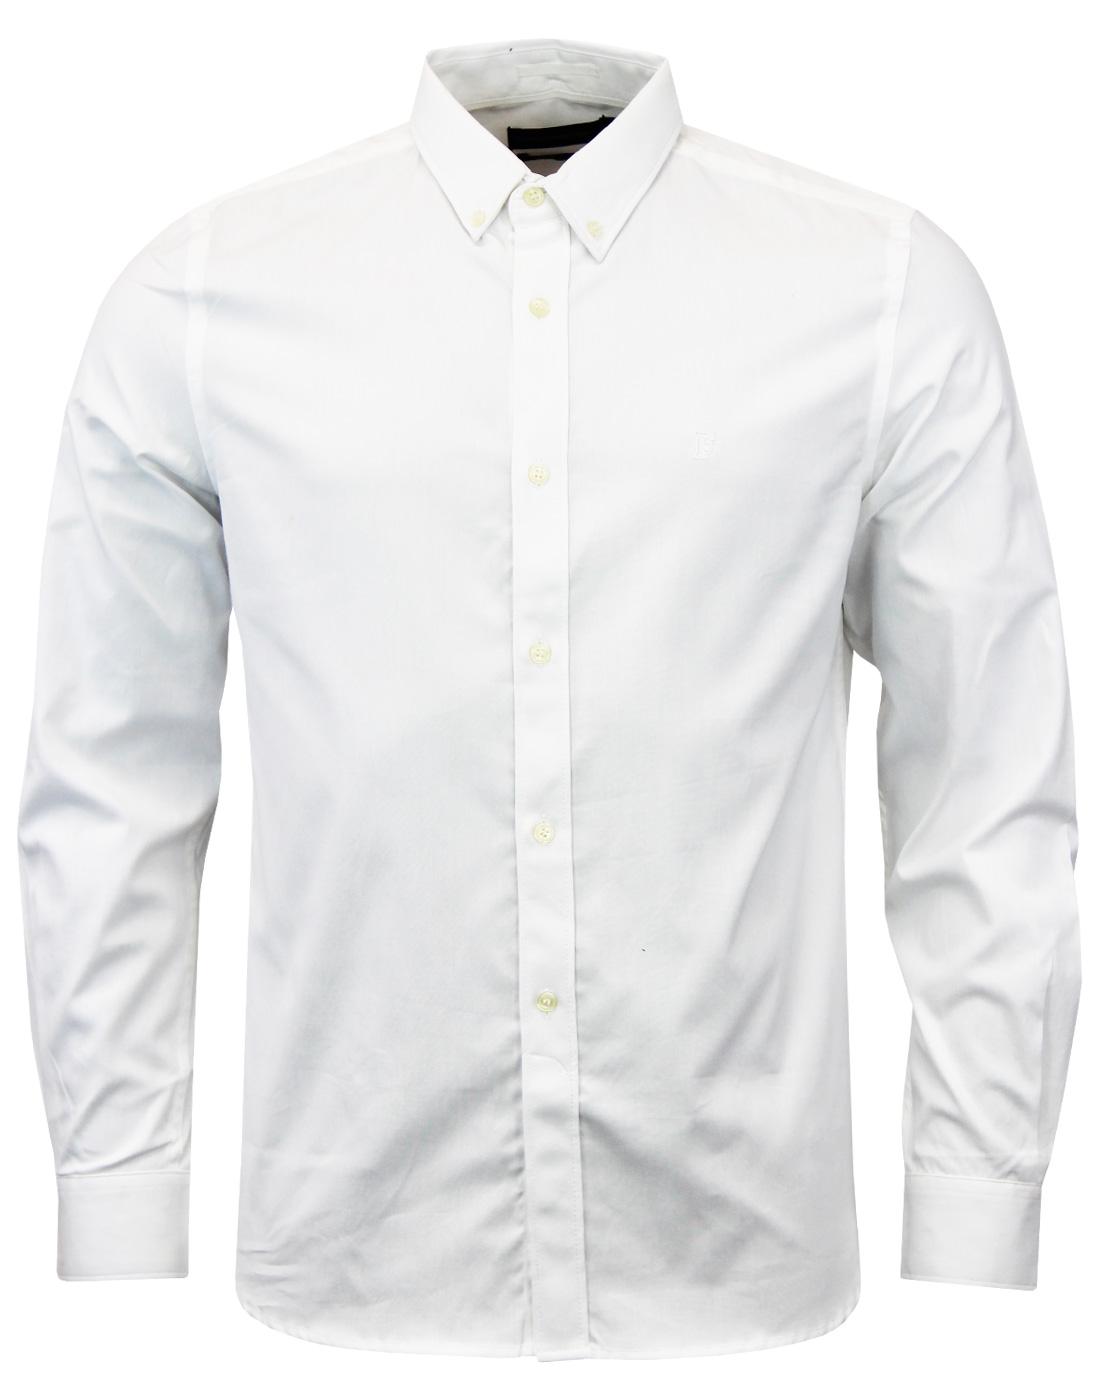 FRENCH CONNECTION Mod Classic Soft Oxford Shirt W